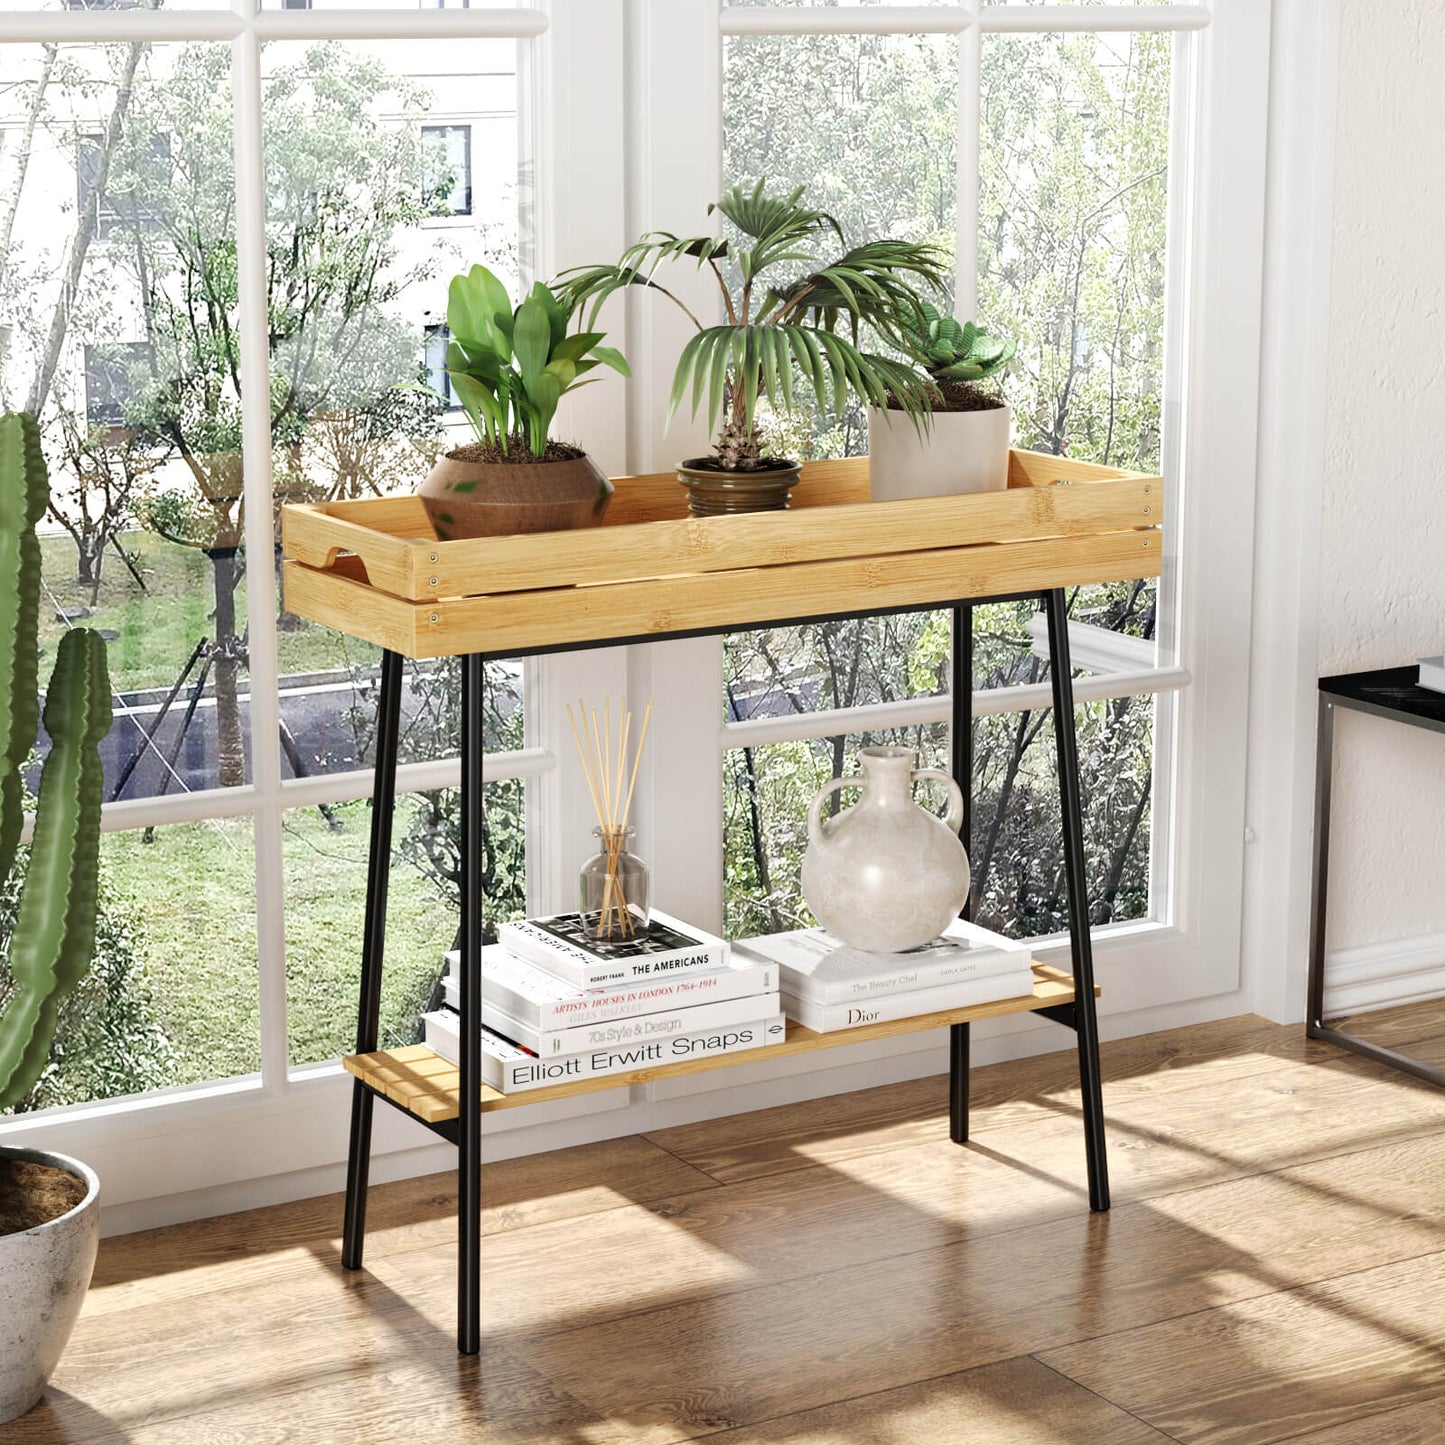 2-Tier Bamboo Plant Stand And Handles